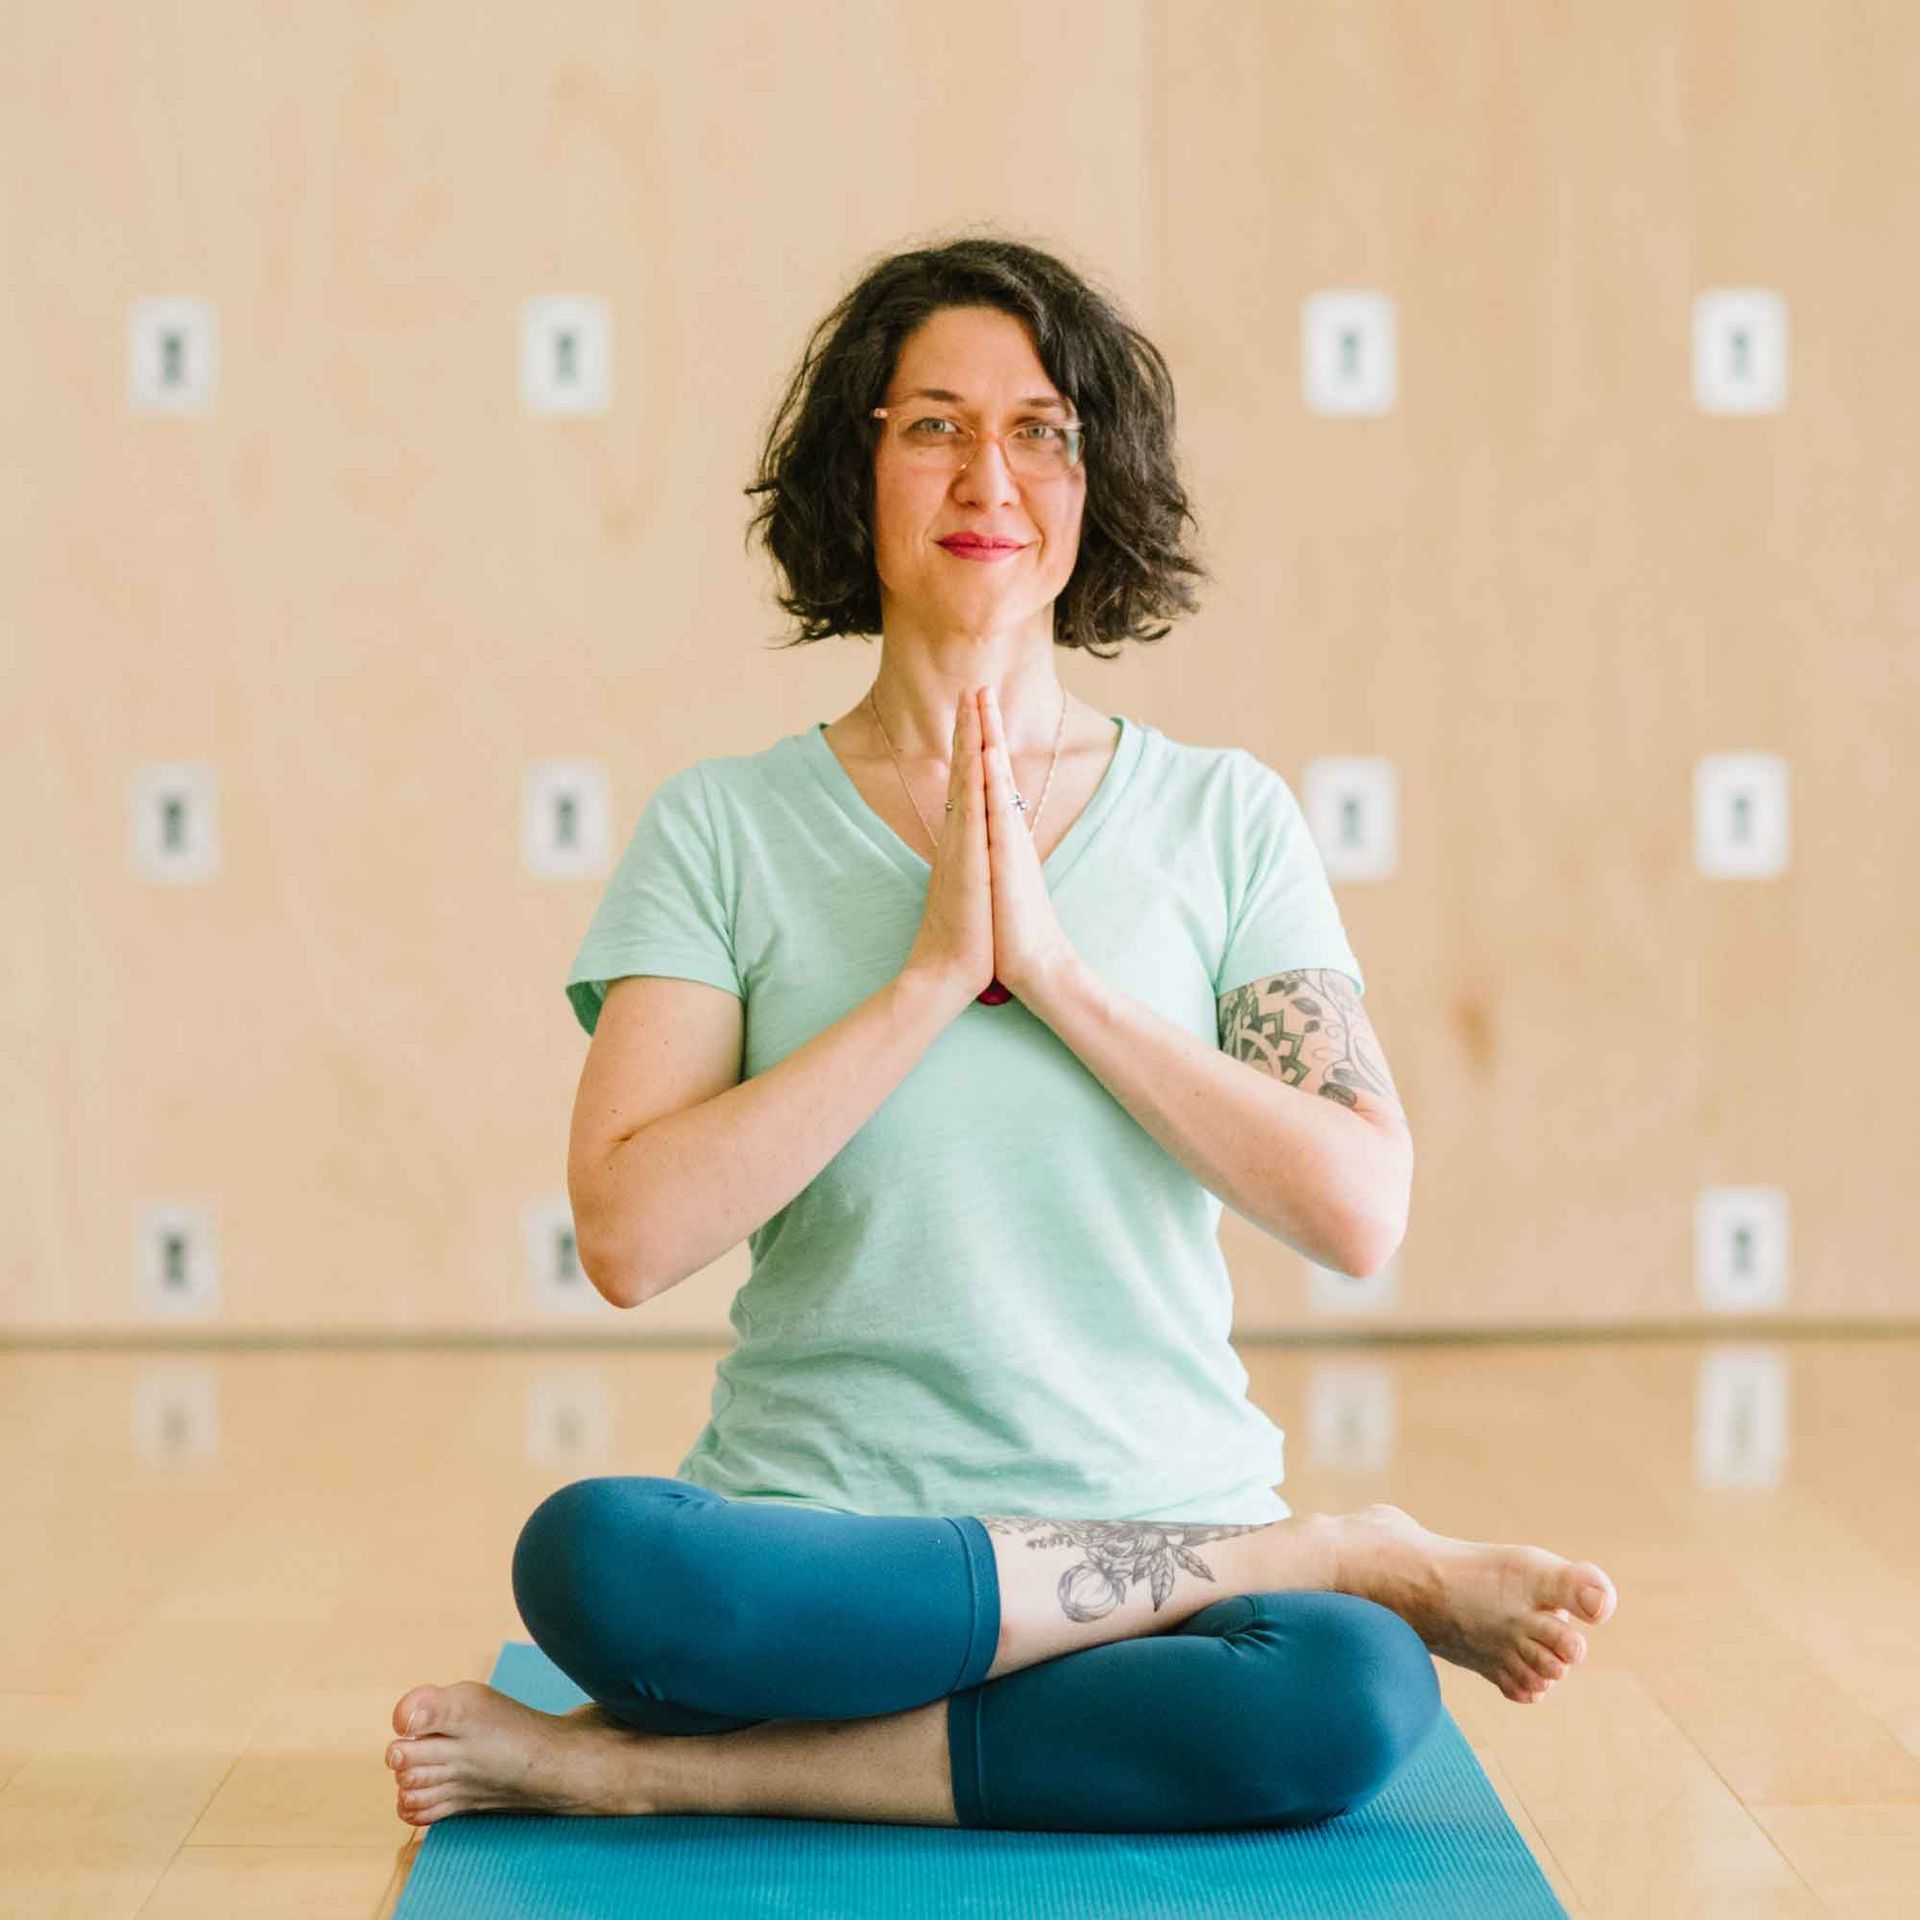 A woman is sitting on a yoga mat with her hands folded in prayer.